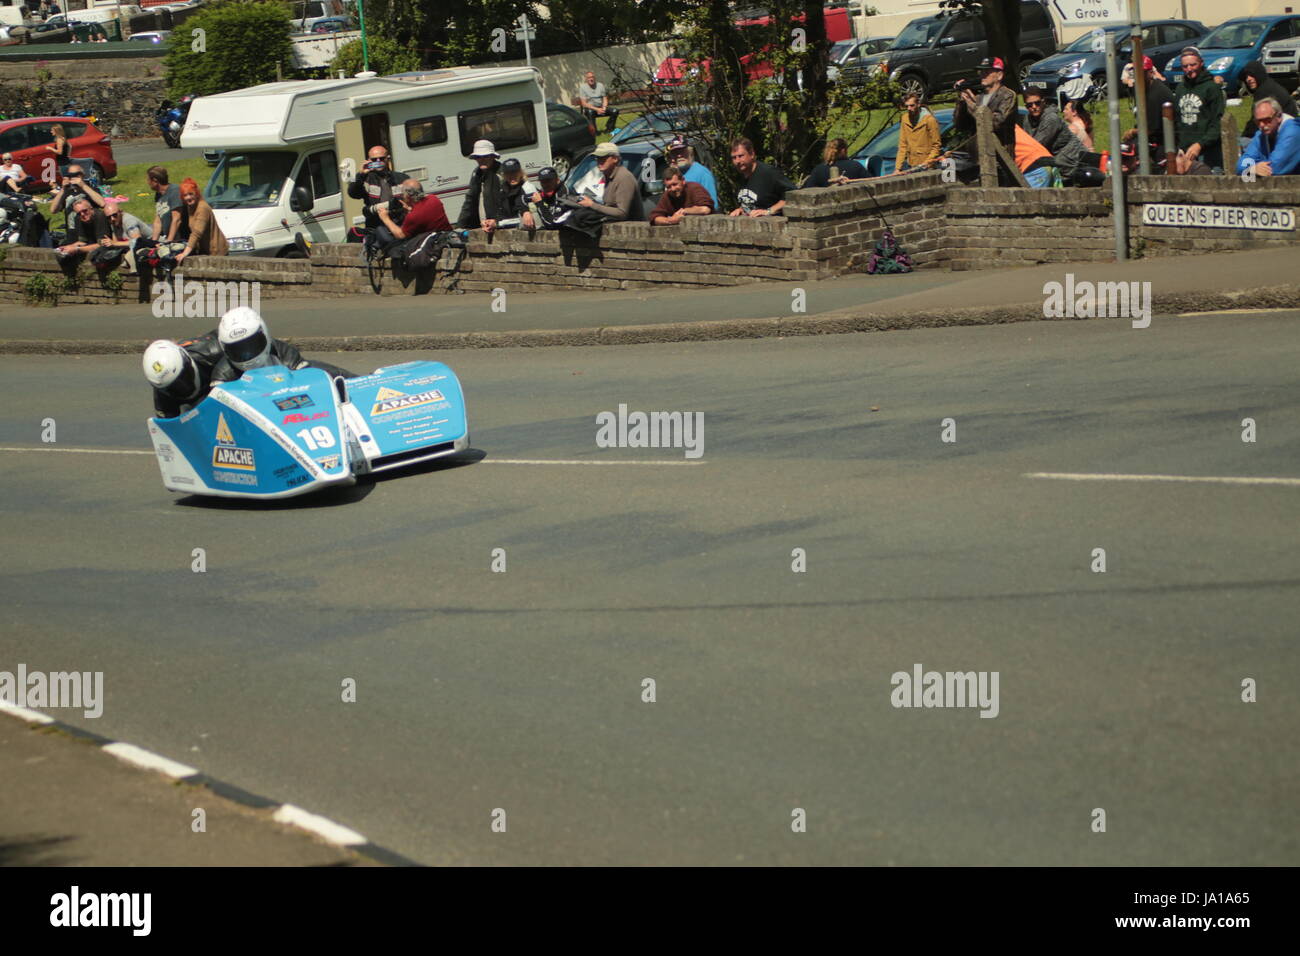 Isle of Man TT Races, Sidecar Qualifying Practice Race, Saturday 3 June 2017.Sidecar qualifying session. Number 19, Darren Hope and Shaun Parker of the Apache Construction/Bar Logo team from Jurby, Isle of Man on a 600cc Ireson Honda sidecar. Credit: Eclectic Art and Photography/Alamy Live News Stock Photo